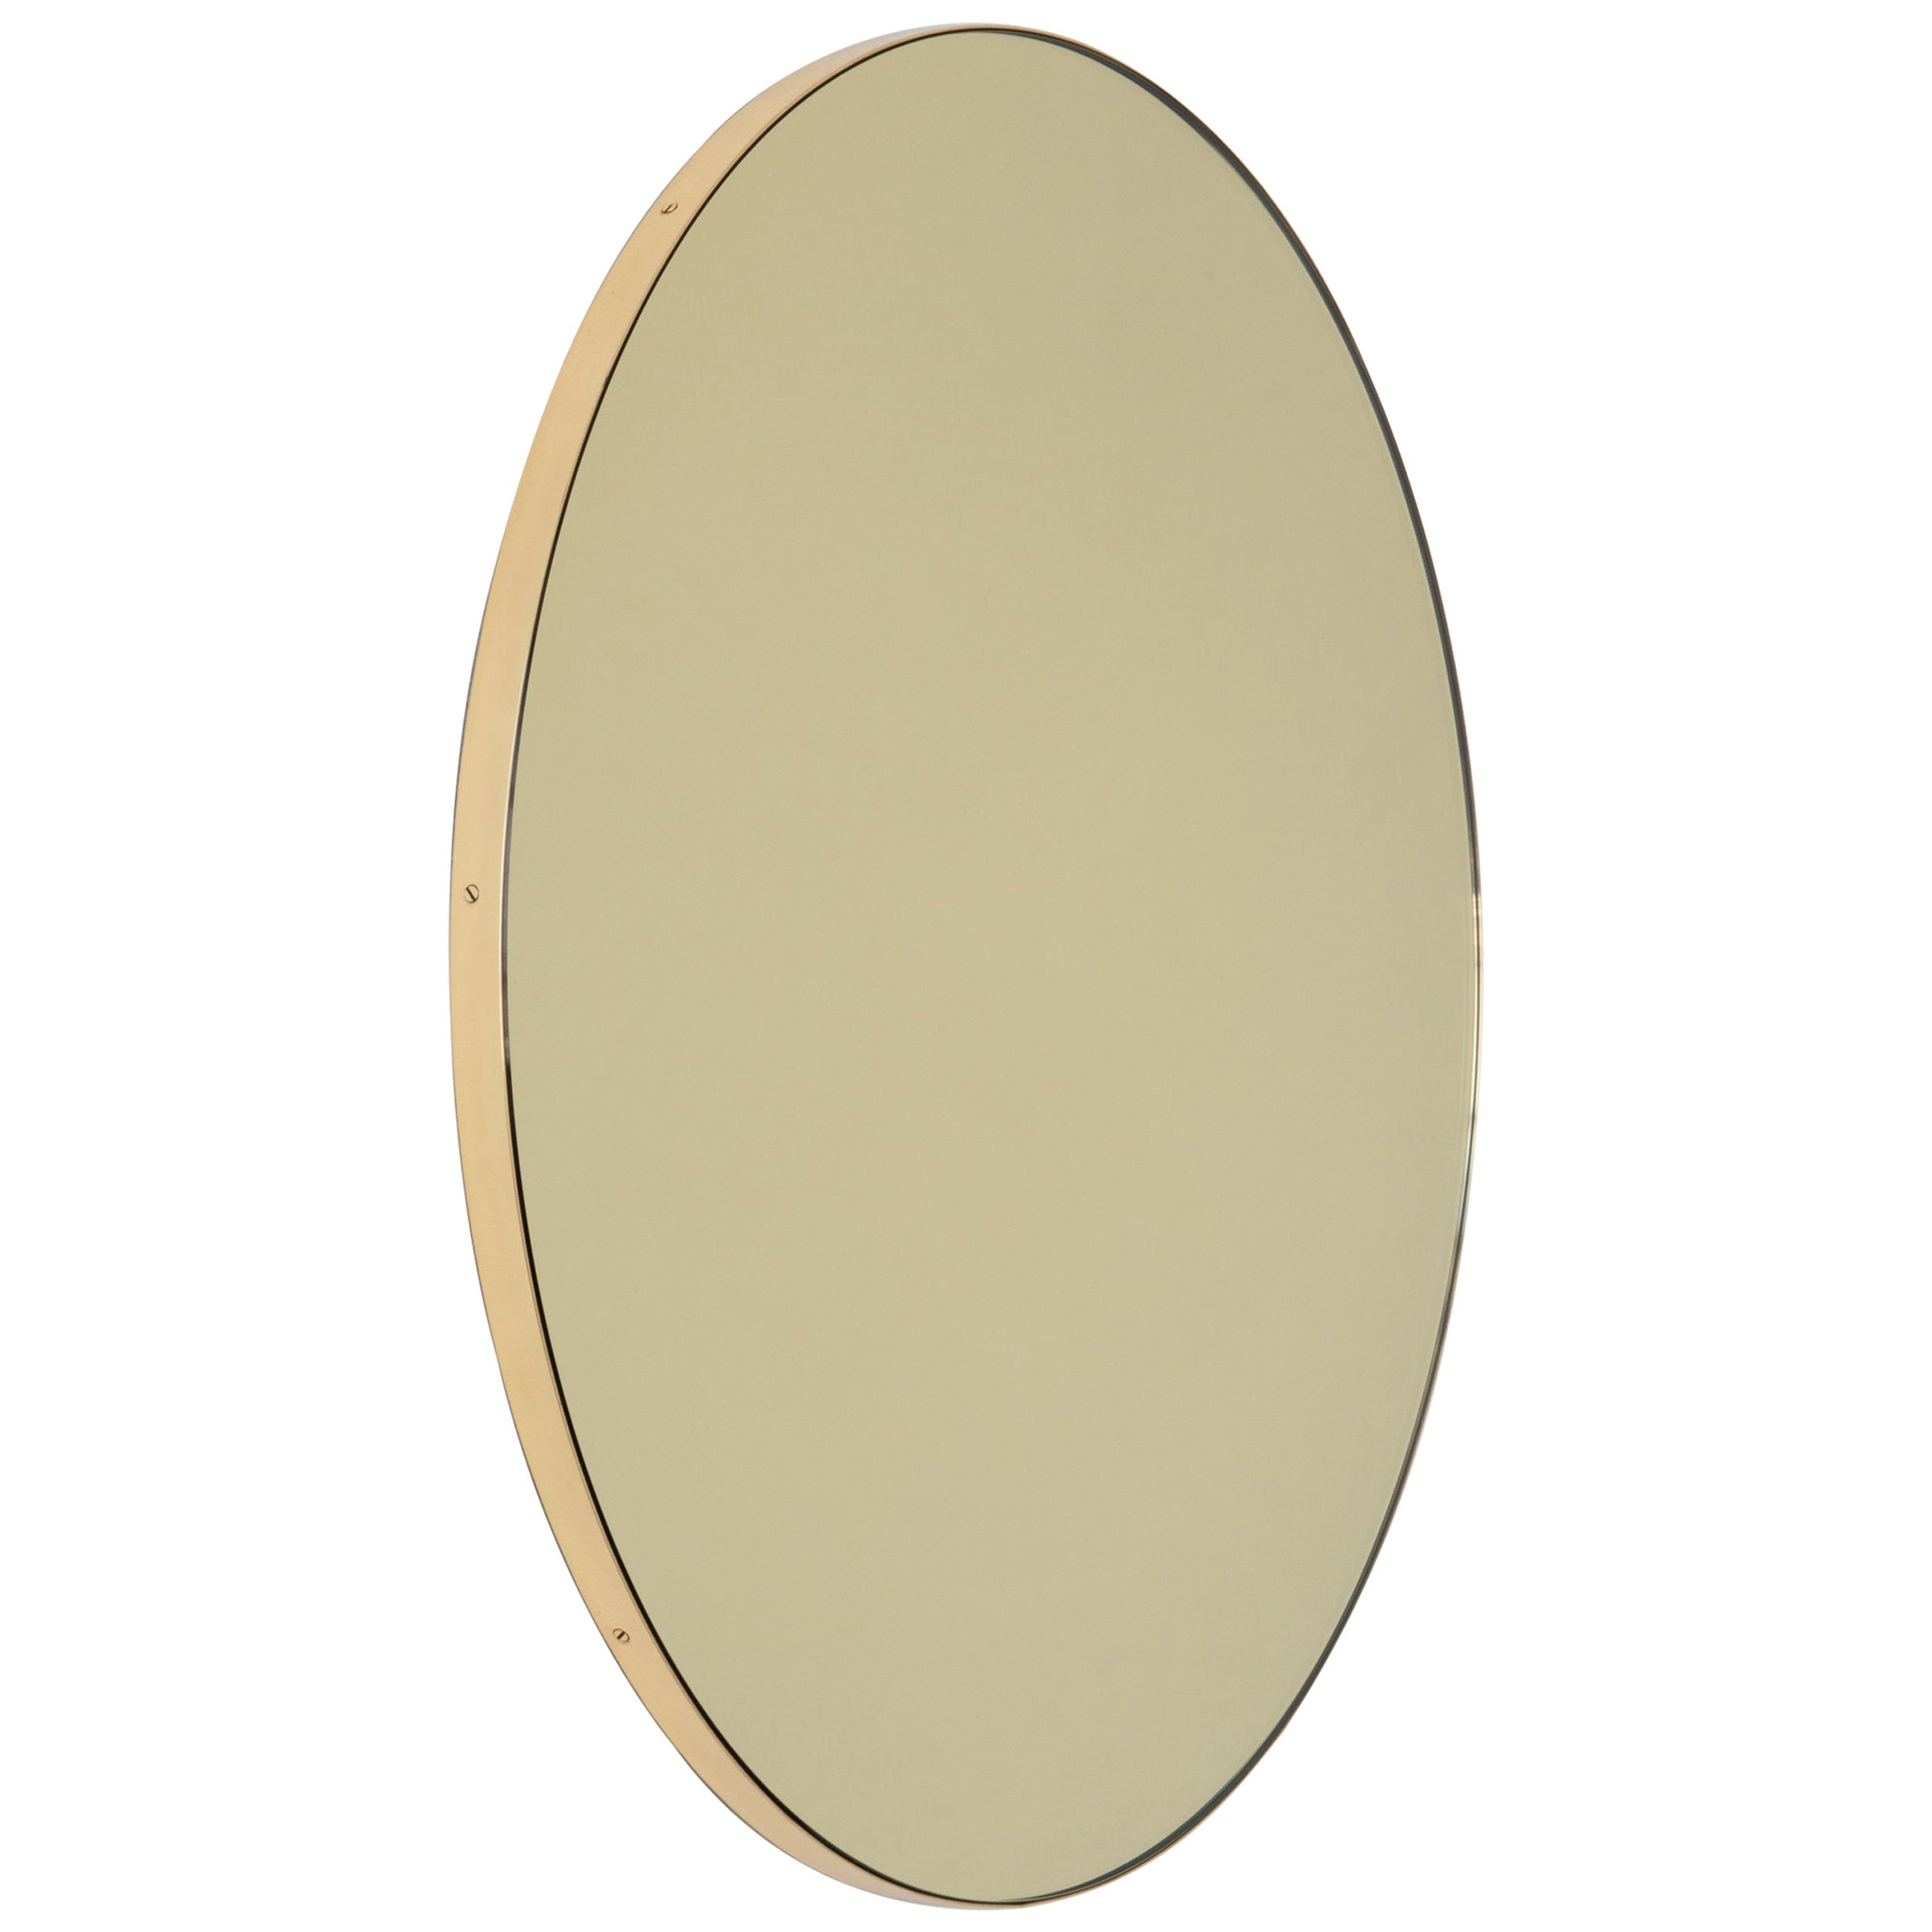 Orbis Gold Tinted Round Modern Mirror with Brushed Brass Frame, Large For Sale